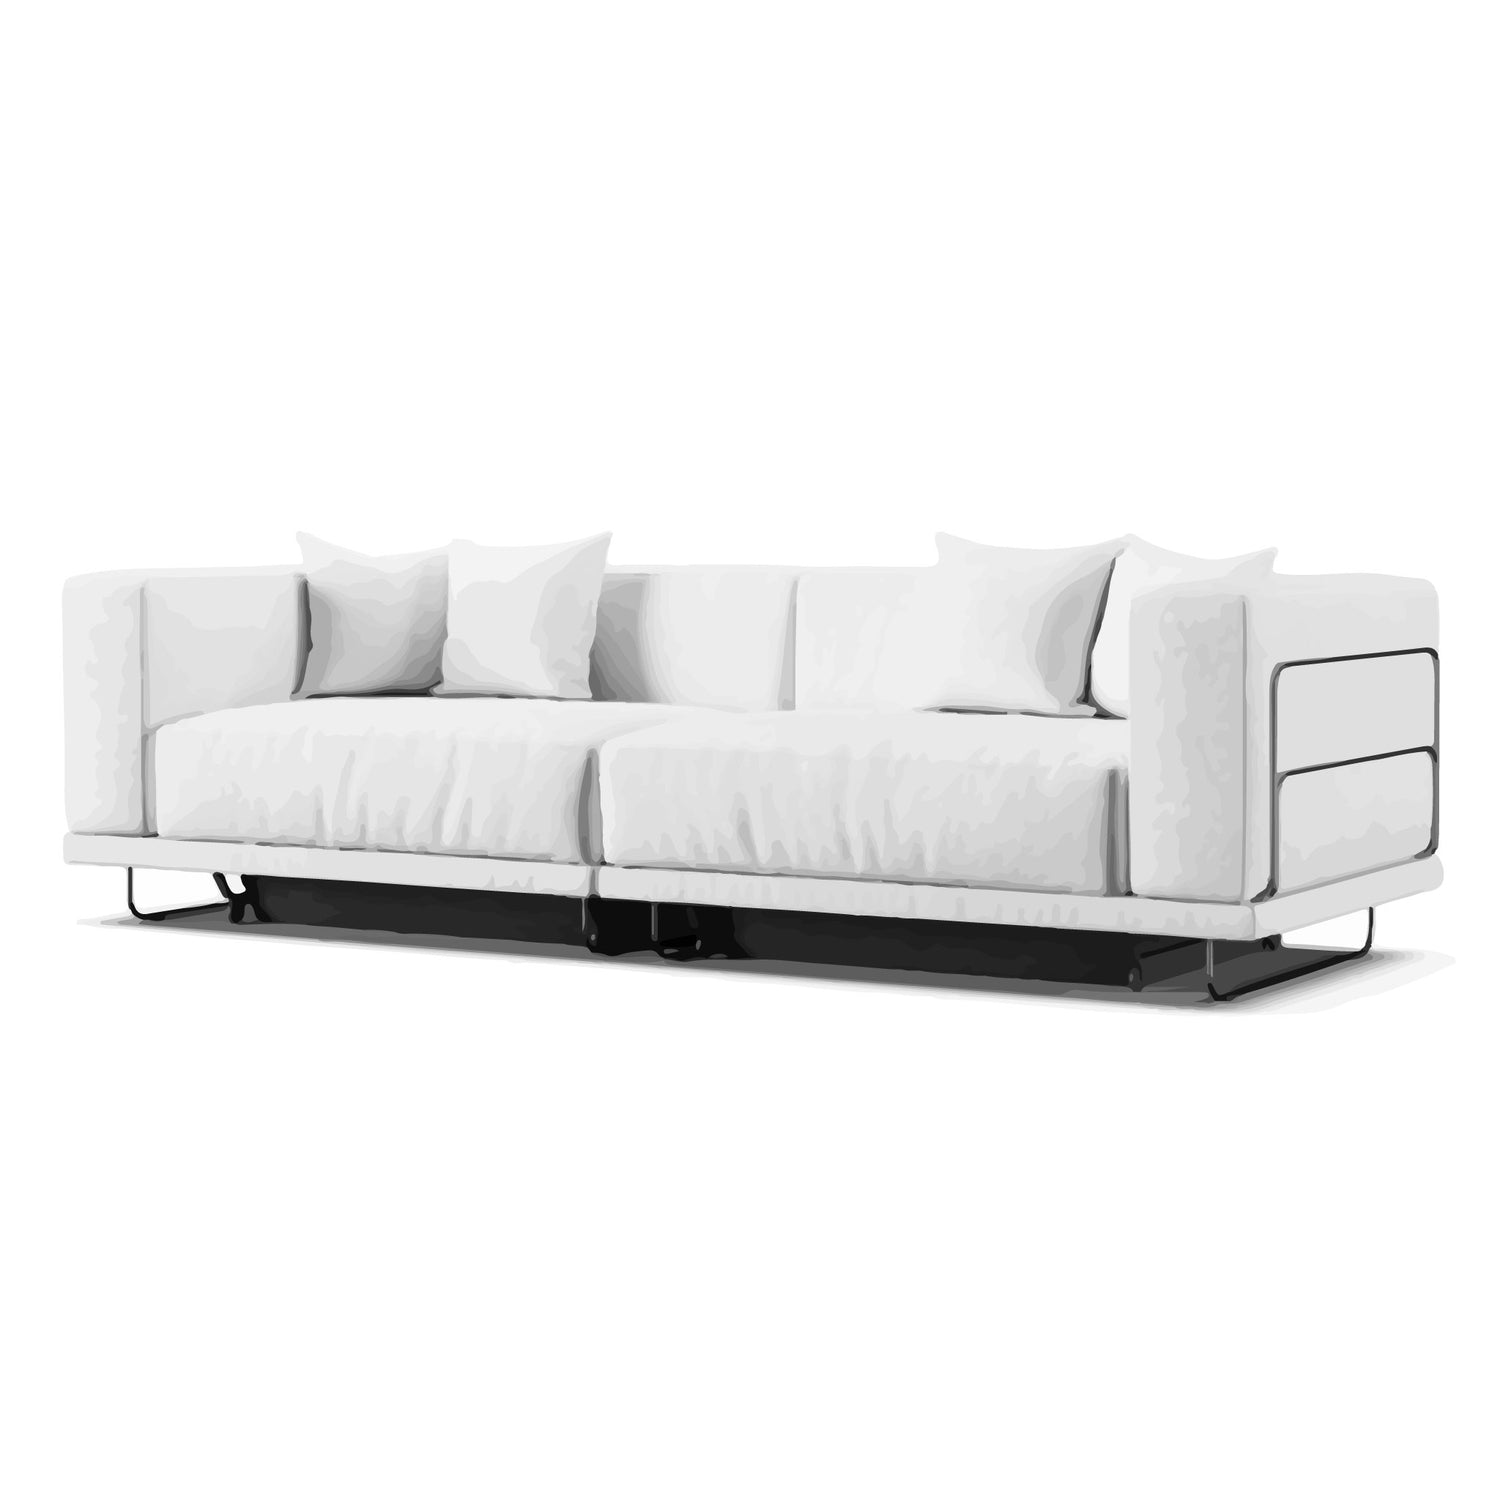 Tylosand Sofa Bed Er The Styled